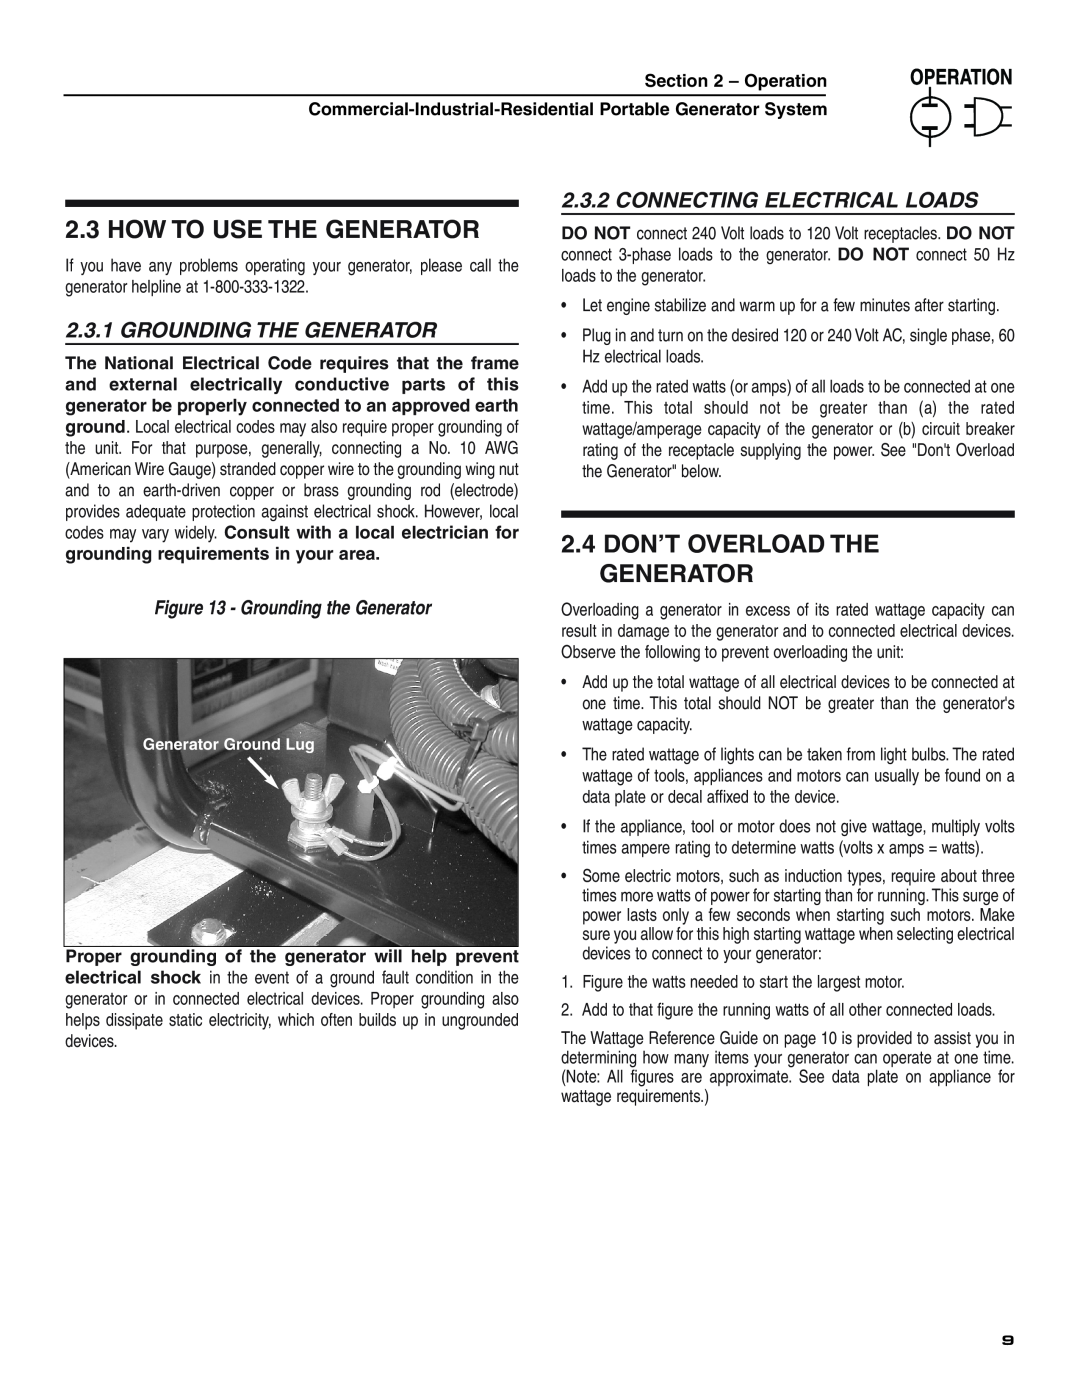 Generac 004451, 004582 How To Use The Generator, 2.4 DON’T OVERLOAD THE GENERATOR, Grounding The Generator, Operation 